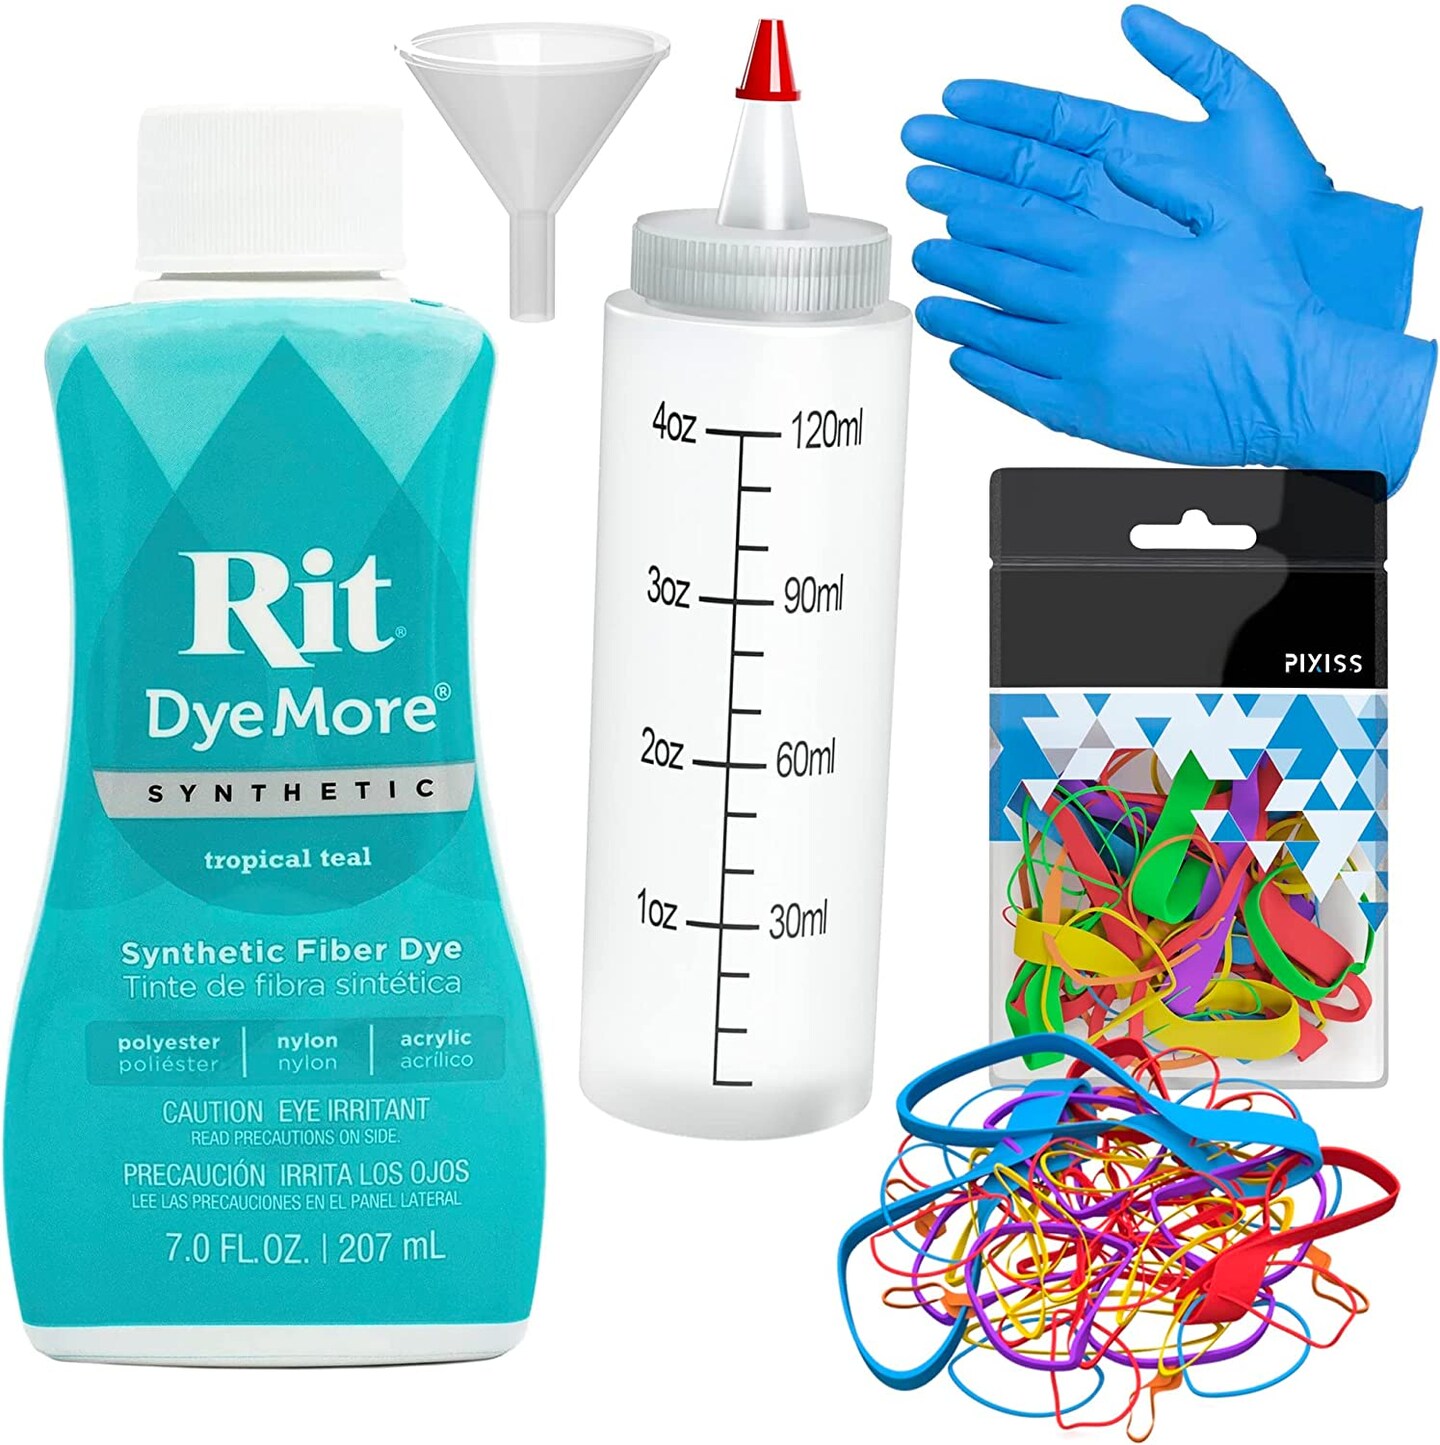 Synthetic Rit Dye More Liquid Fabric Dye Tropical Teal, Pixiss Rit Dye  Accessories Kit